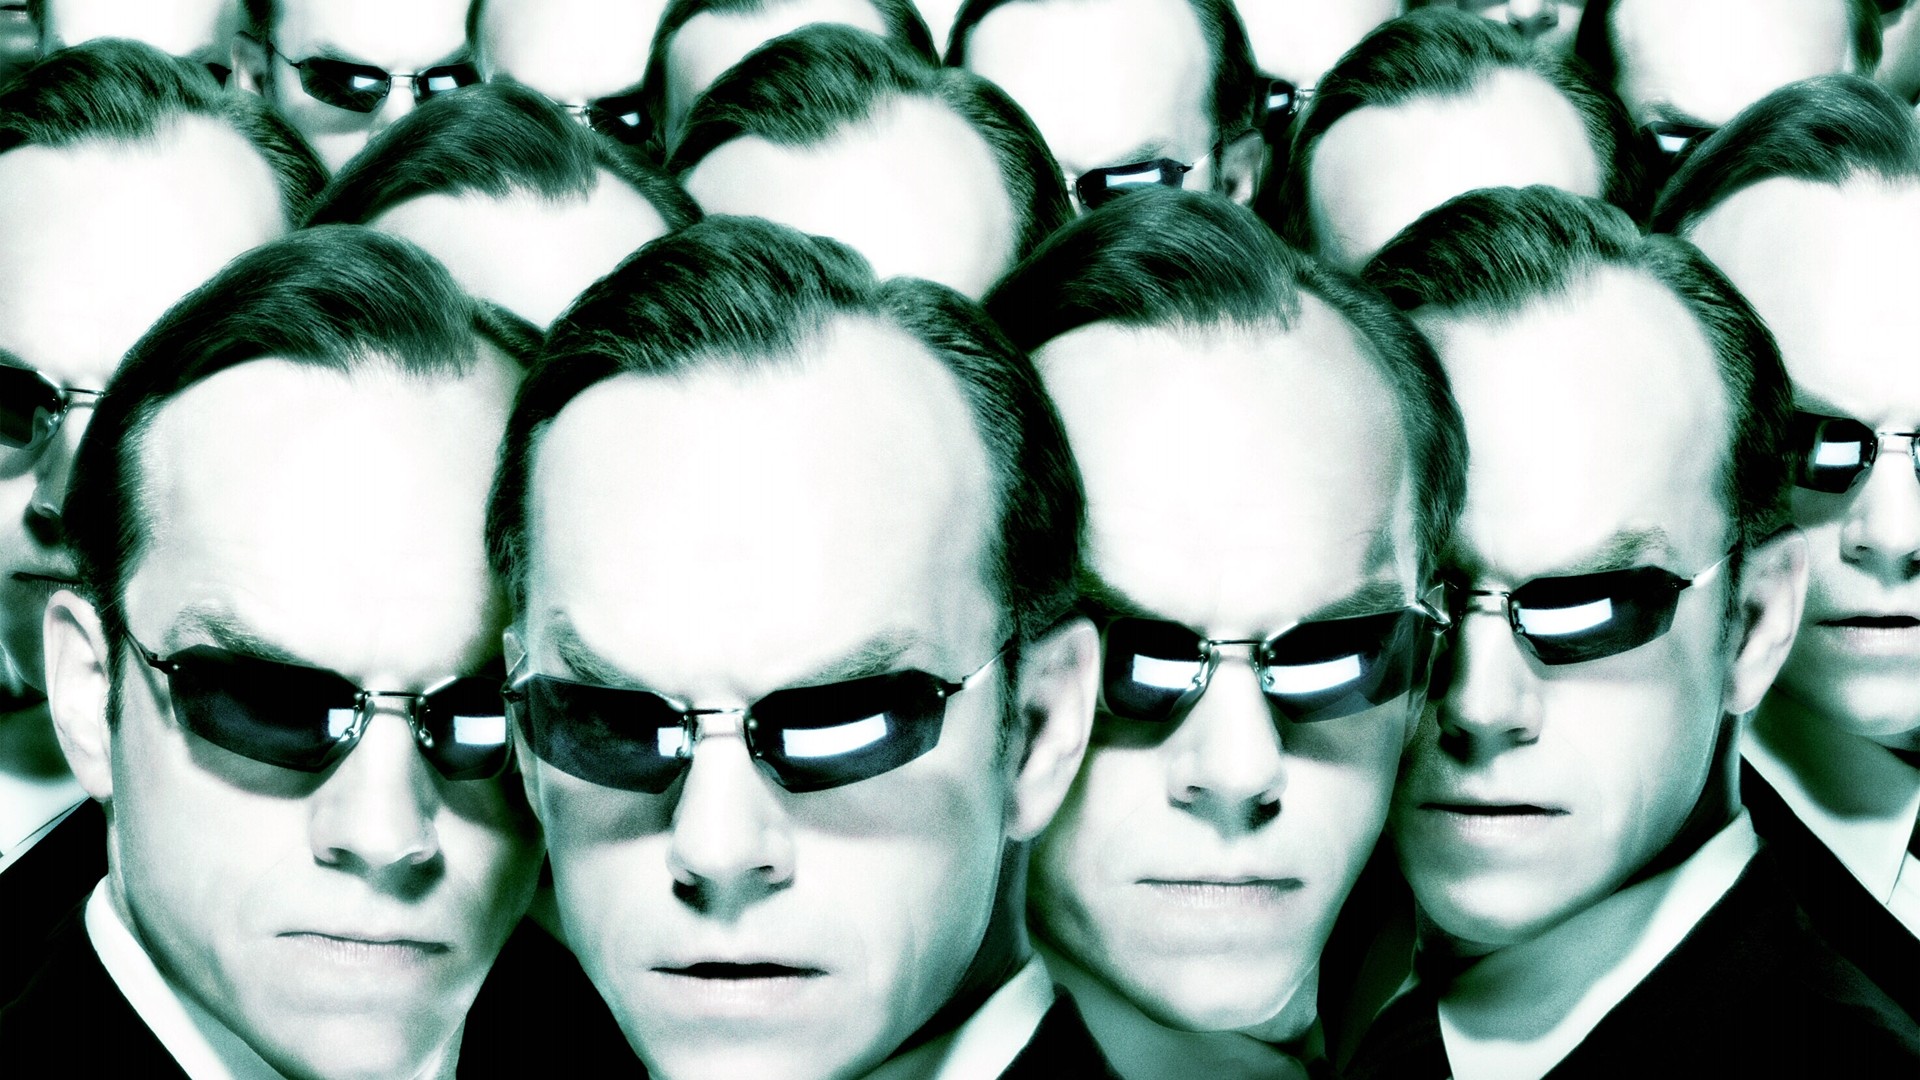 Movies The Matrix Reloaded 2003 Year 1920x1080